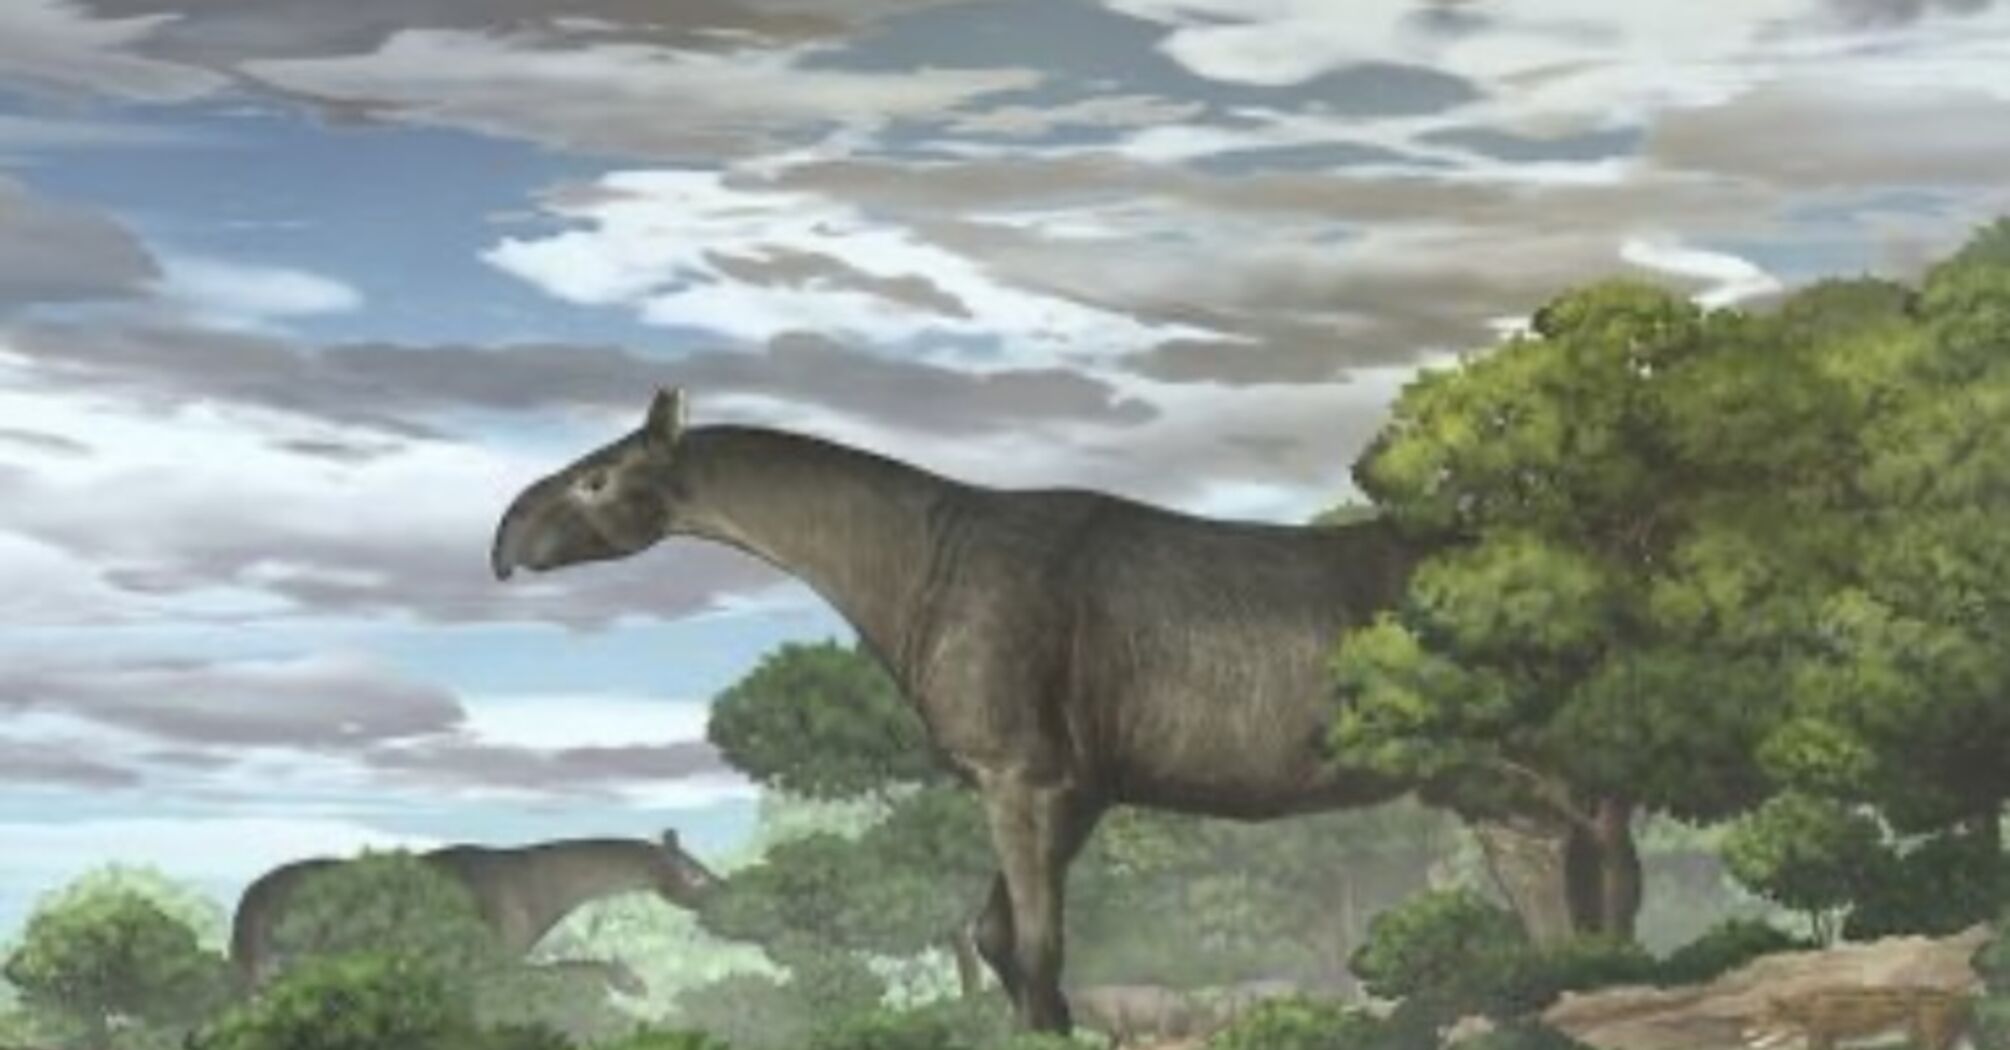 Scientists discover a new species of rhinoceros that lived 26.5 million years ago and weighed 21 tons